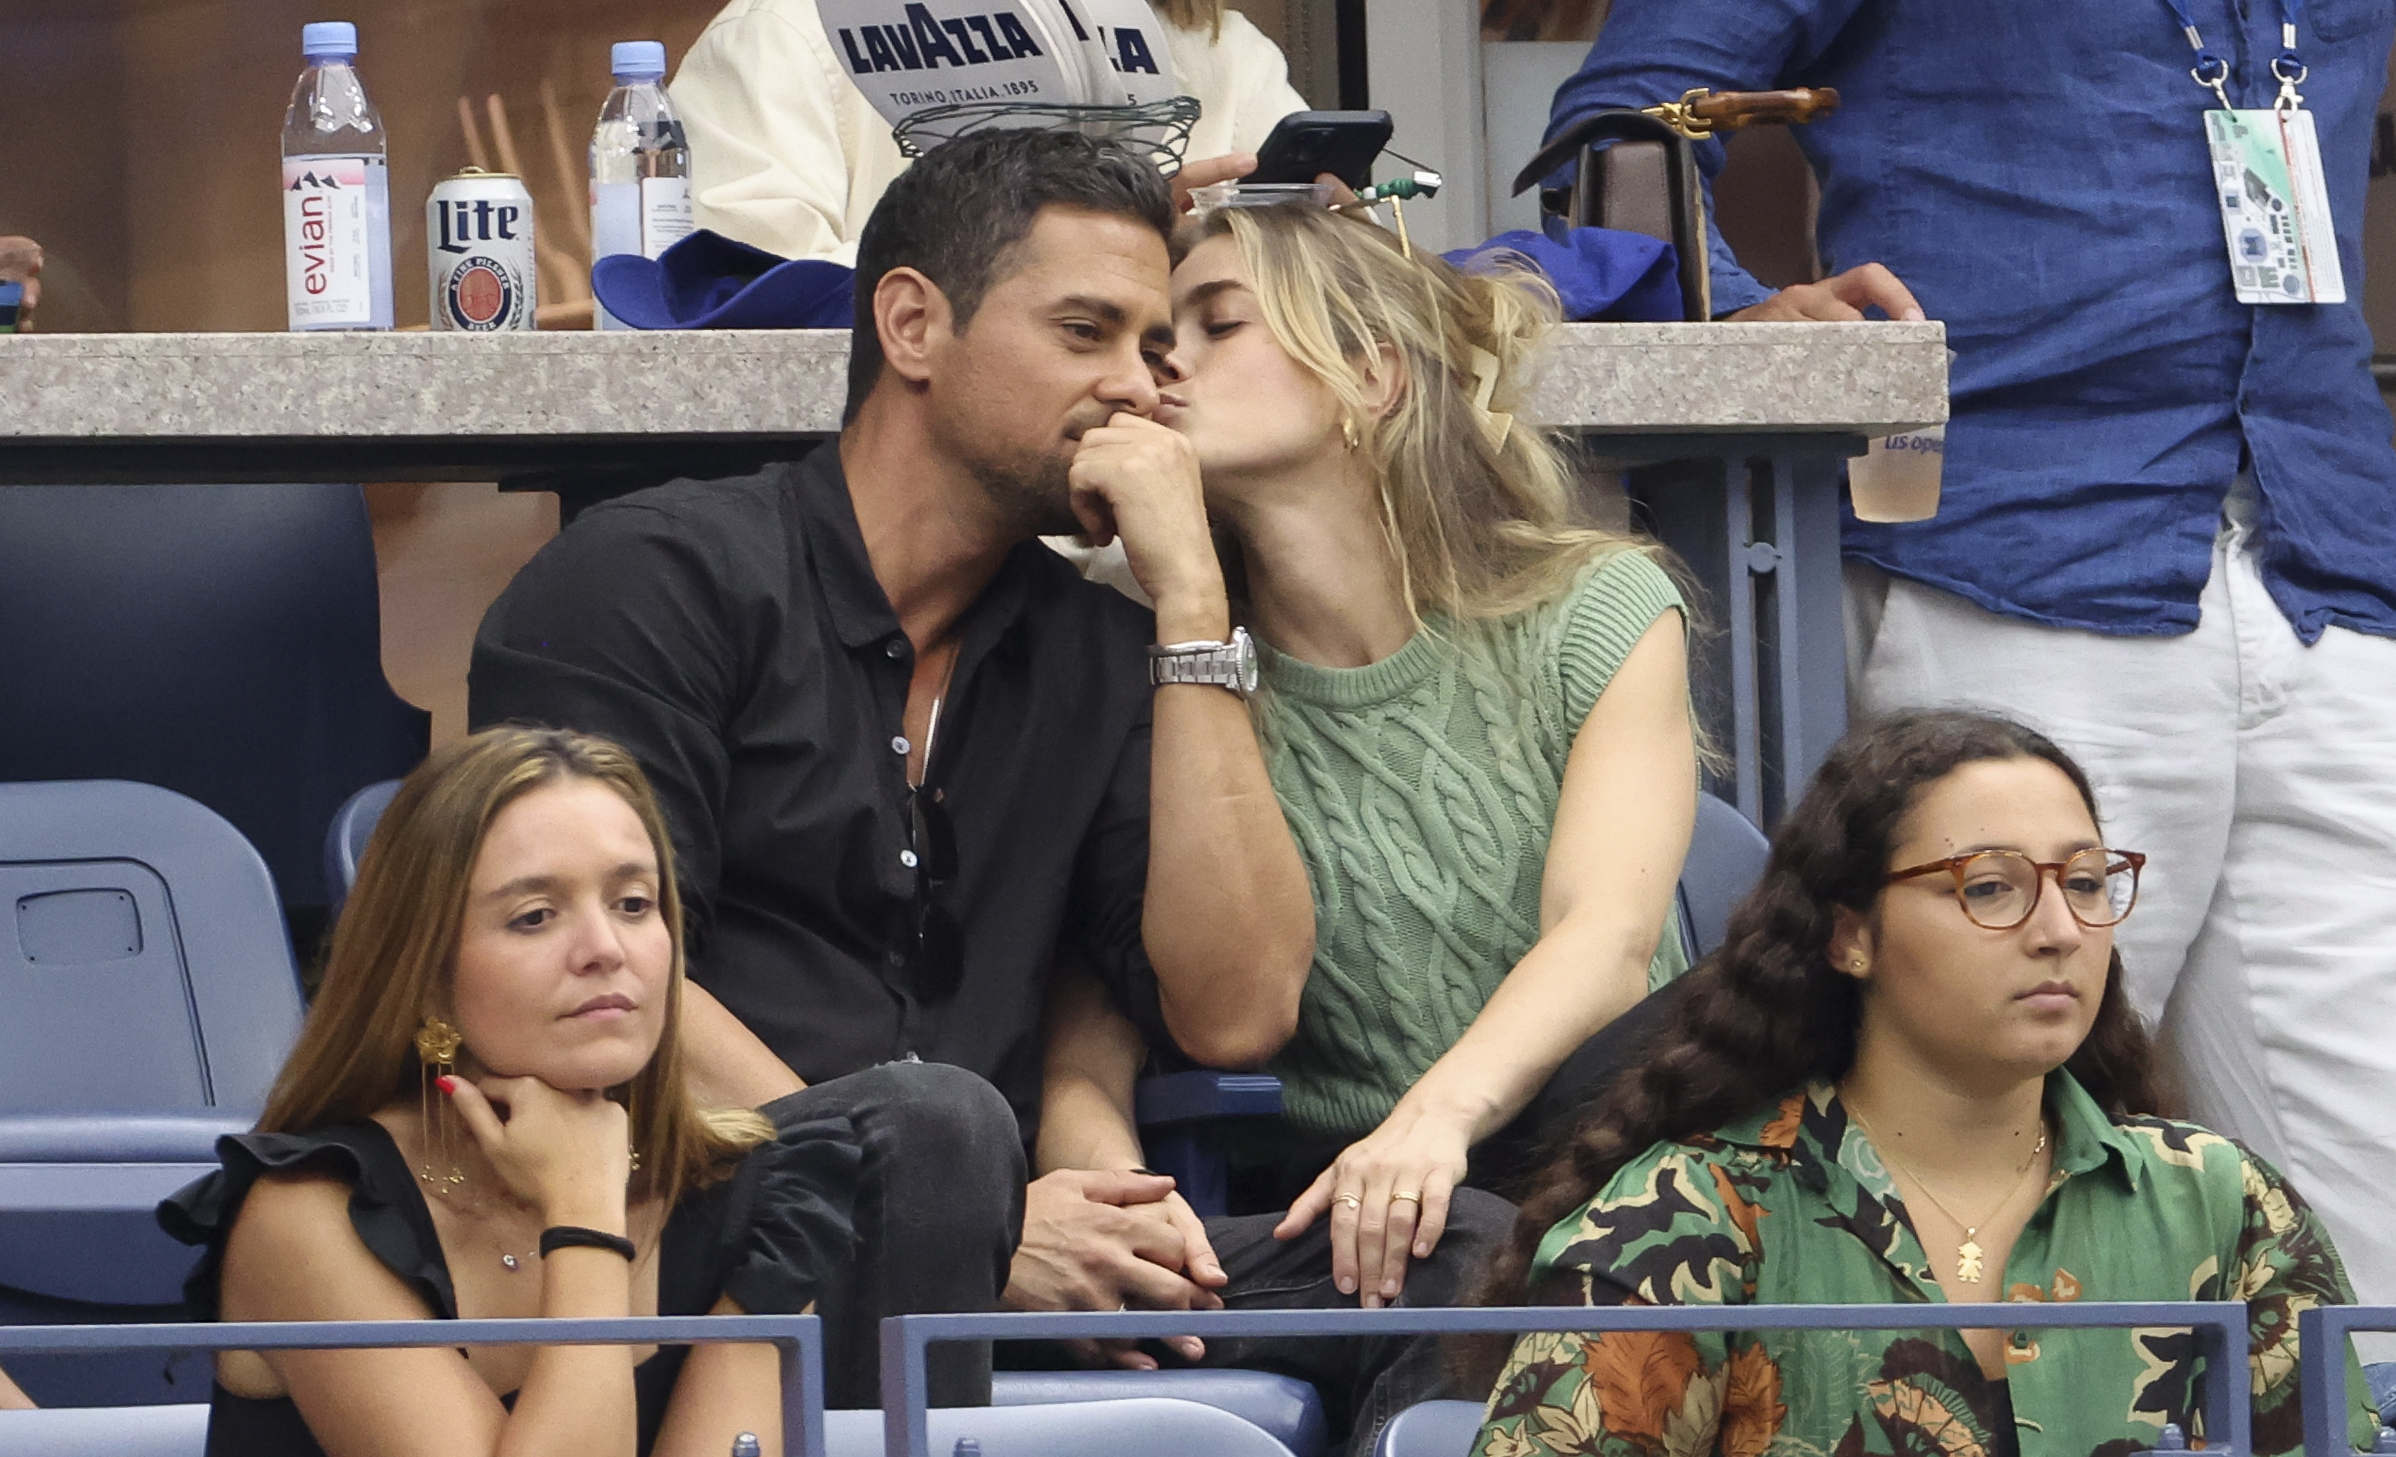 Ramirez and Melissa Roxburgh attend the men's final on day 14 of the US Open 2022, at the USTA Billie Jean King National Tennis Center, on September 11, 2022, in Queens, New York City. | Source: Getty Images